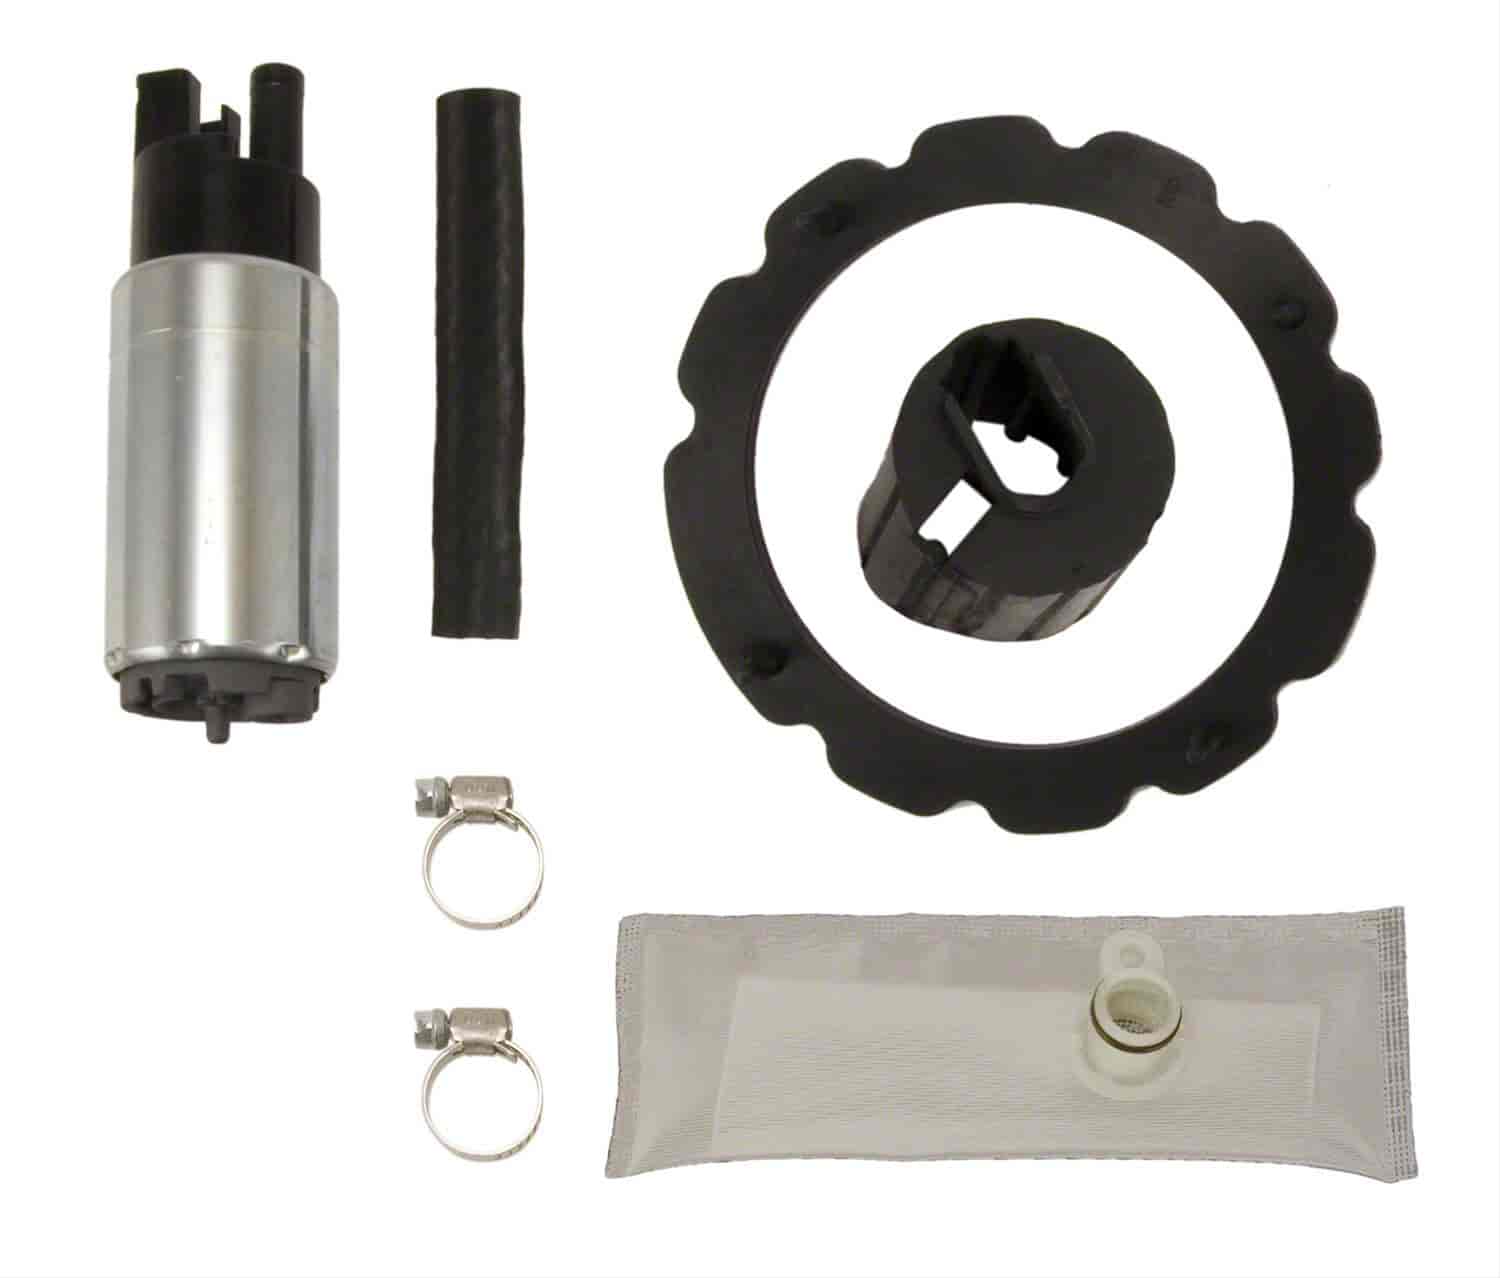 EFI In-Tank Electric Fuel Pump And Strainer Set for 1997-1998 Ford F-150/F-250